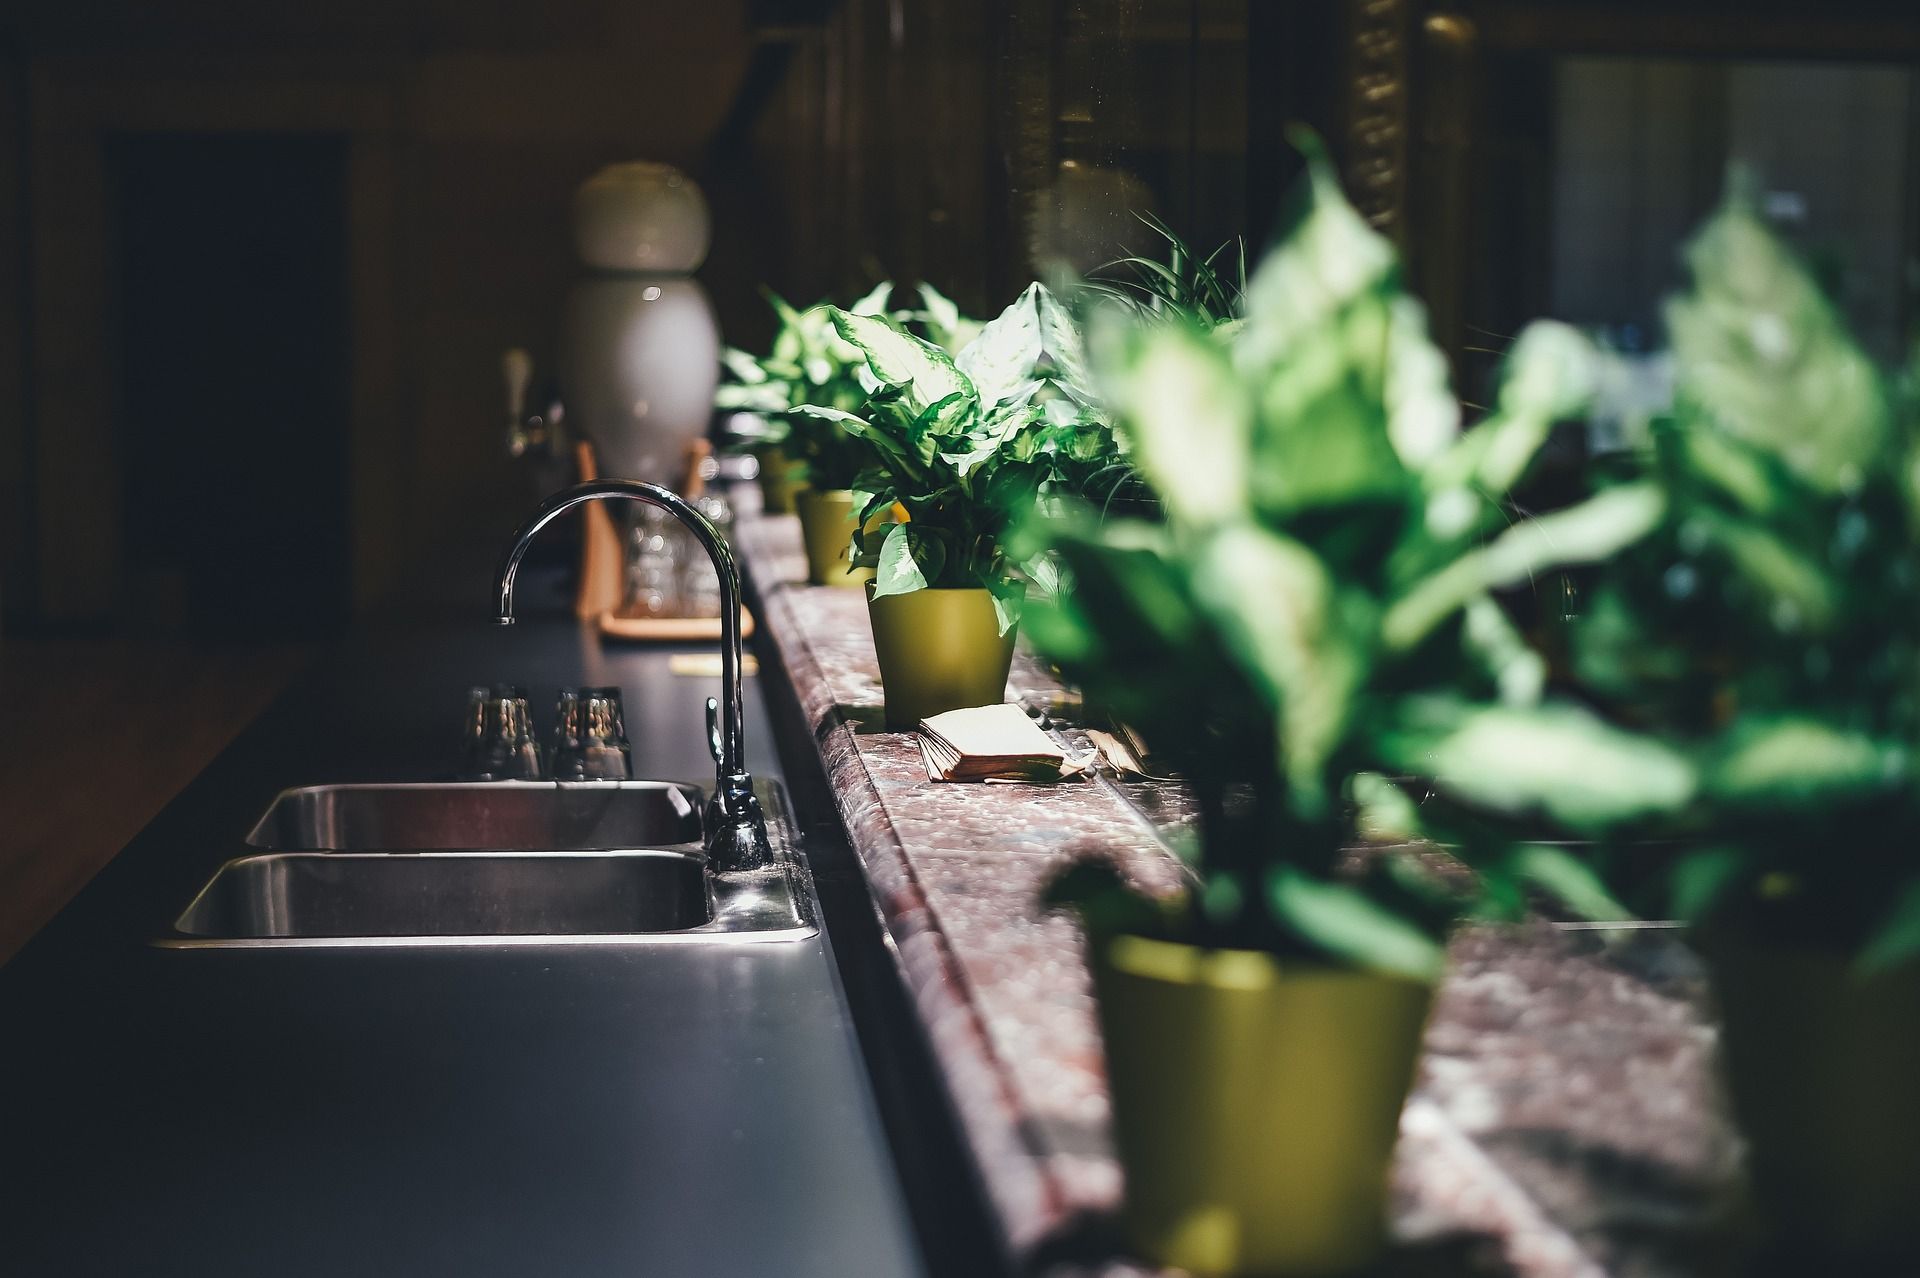 Image of a kitchen sink with plants for decoration